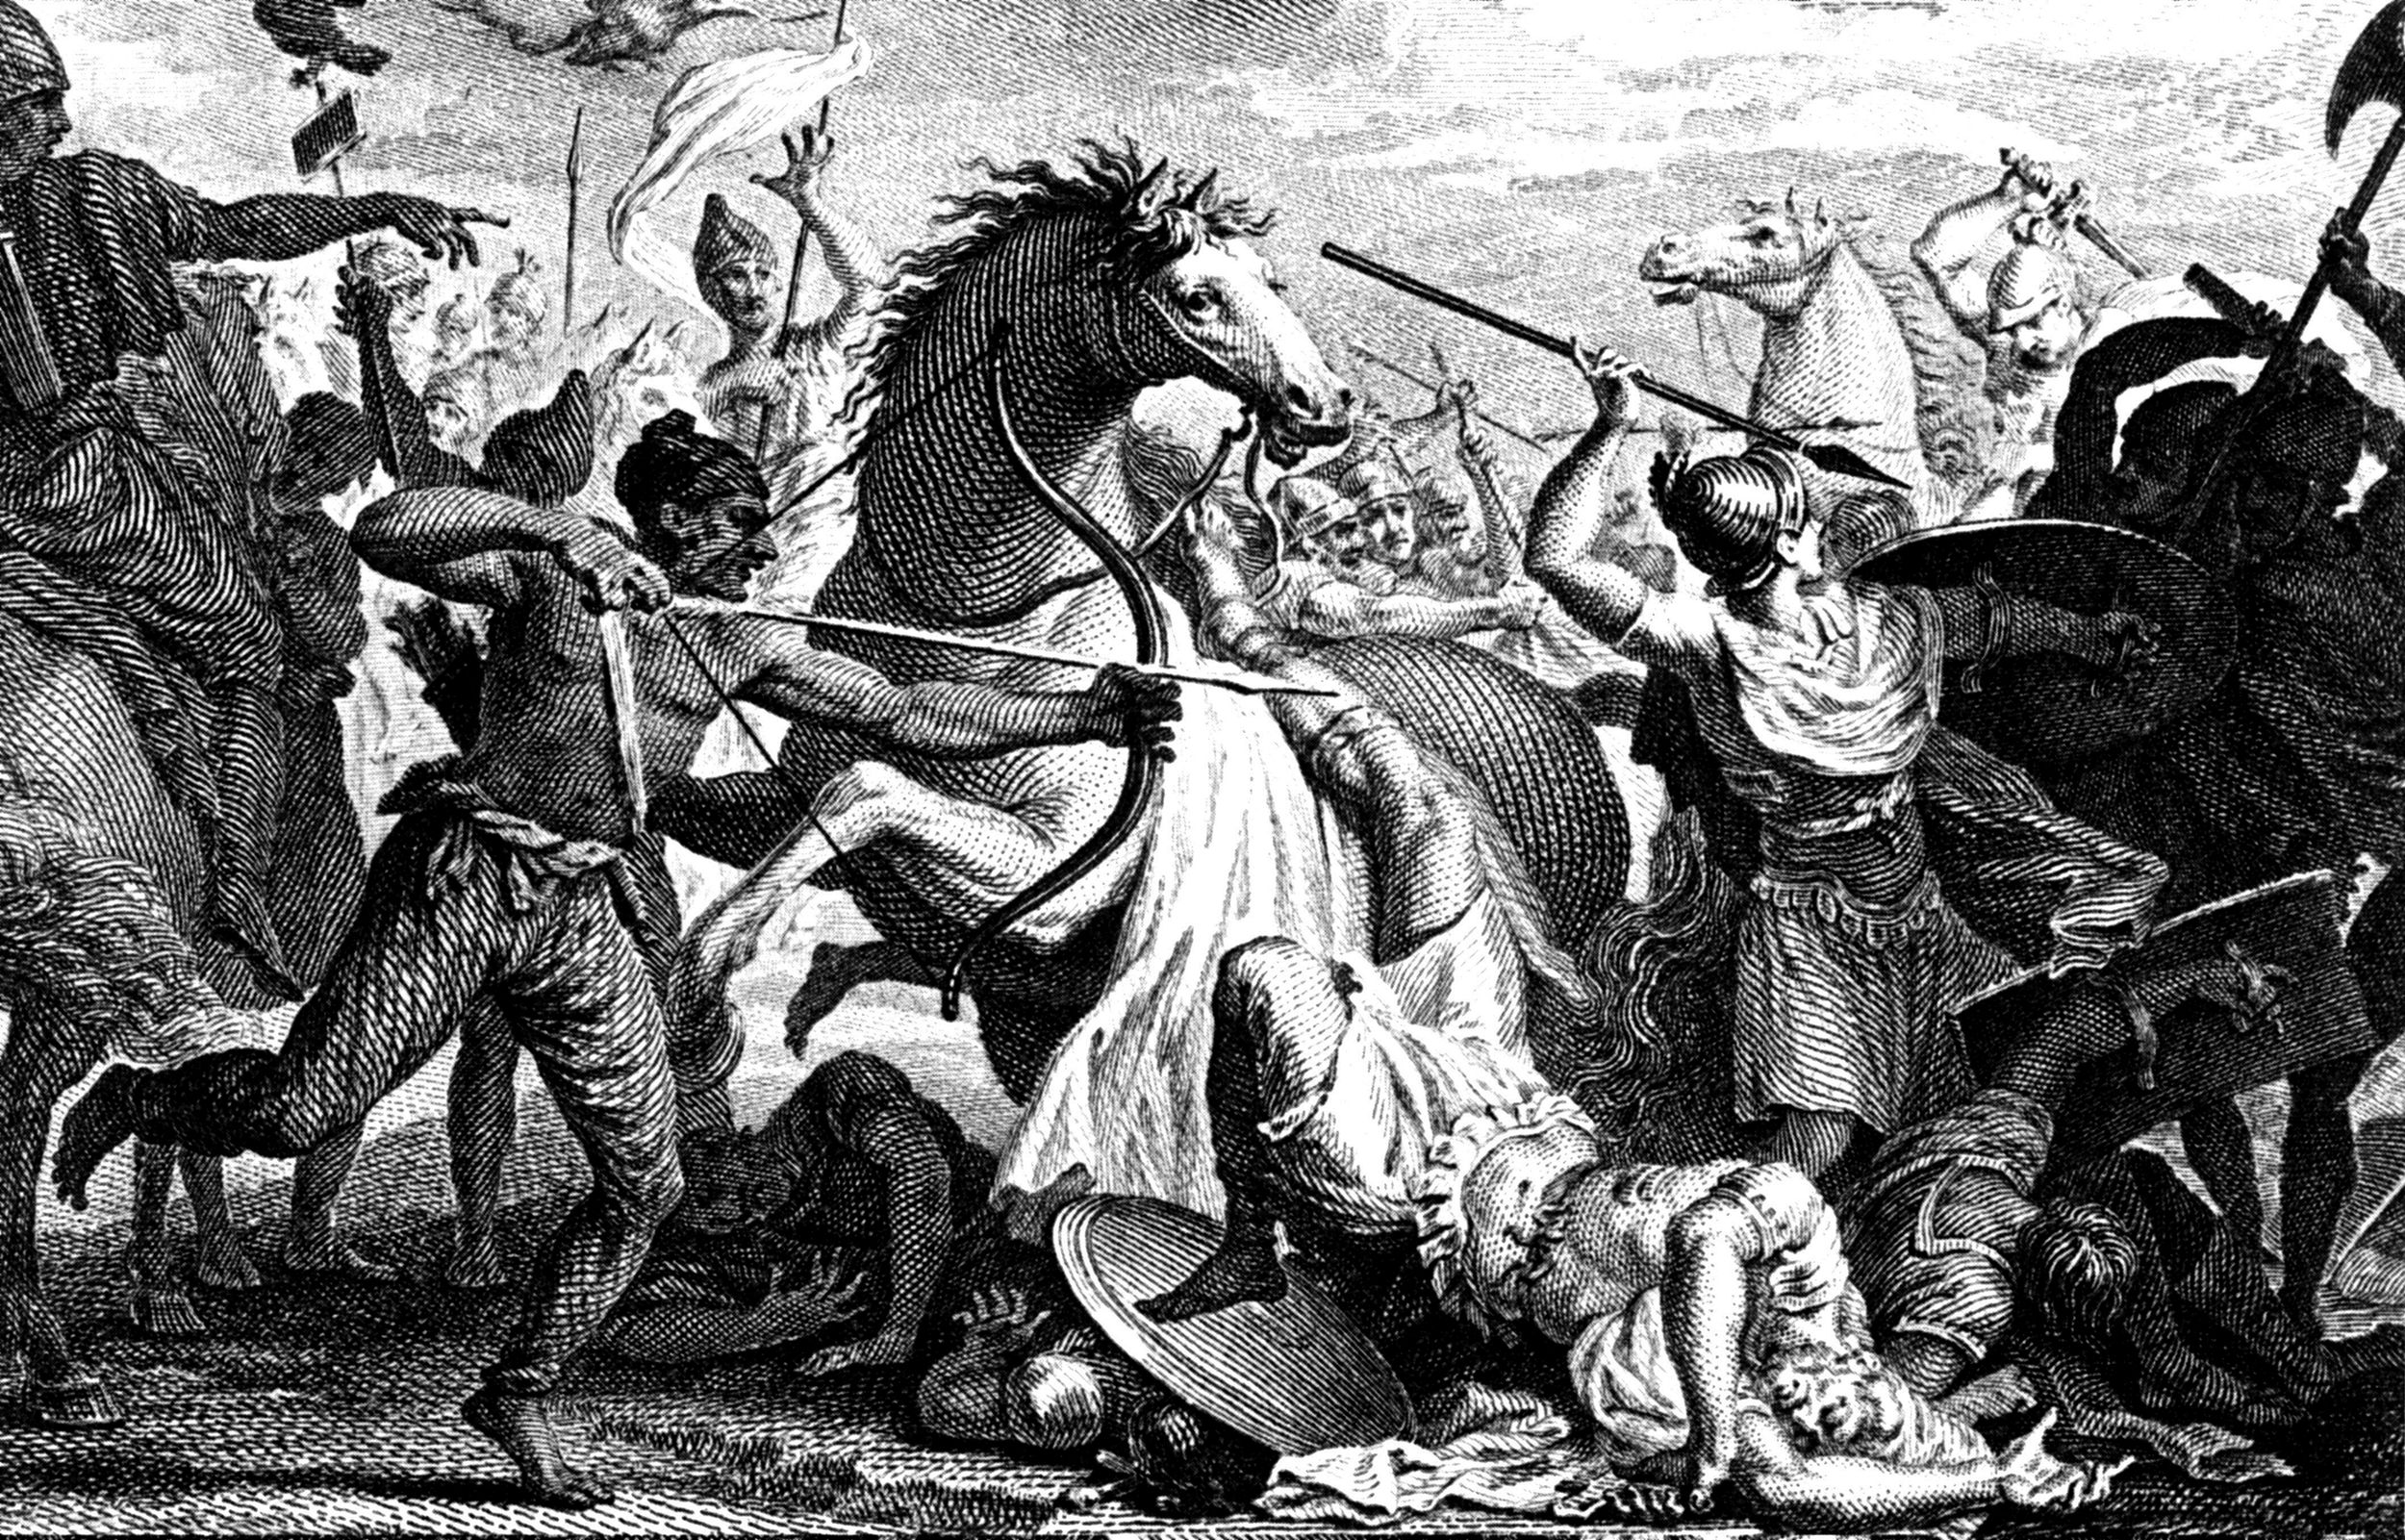 Crassus, who tried to parlay with the Parthian commander Surena, was killed when the fighting suddenly resumed. He is shown falling dead from his horse (lower right) as Parthians assault the Romans. 